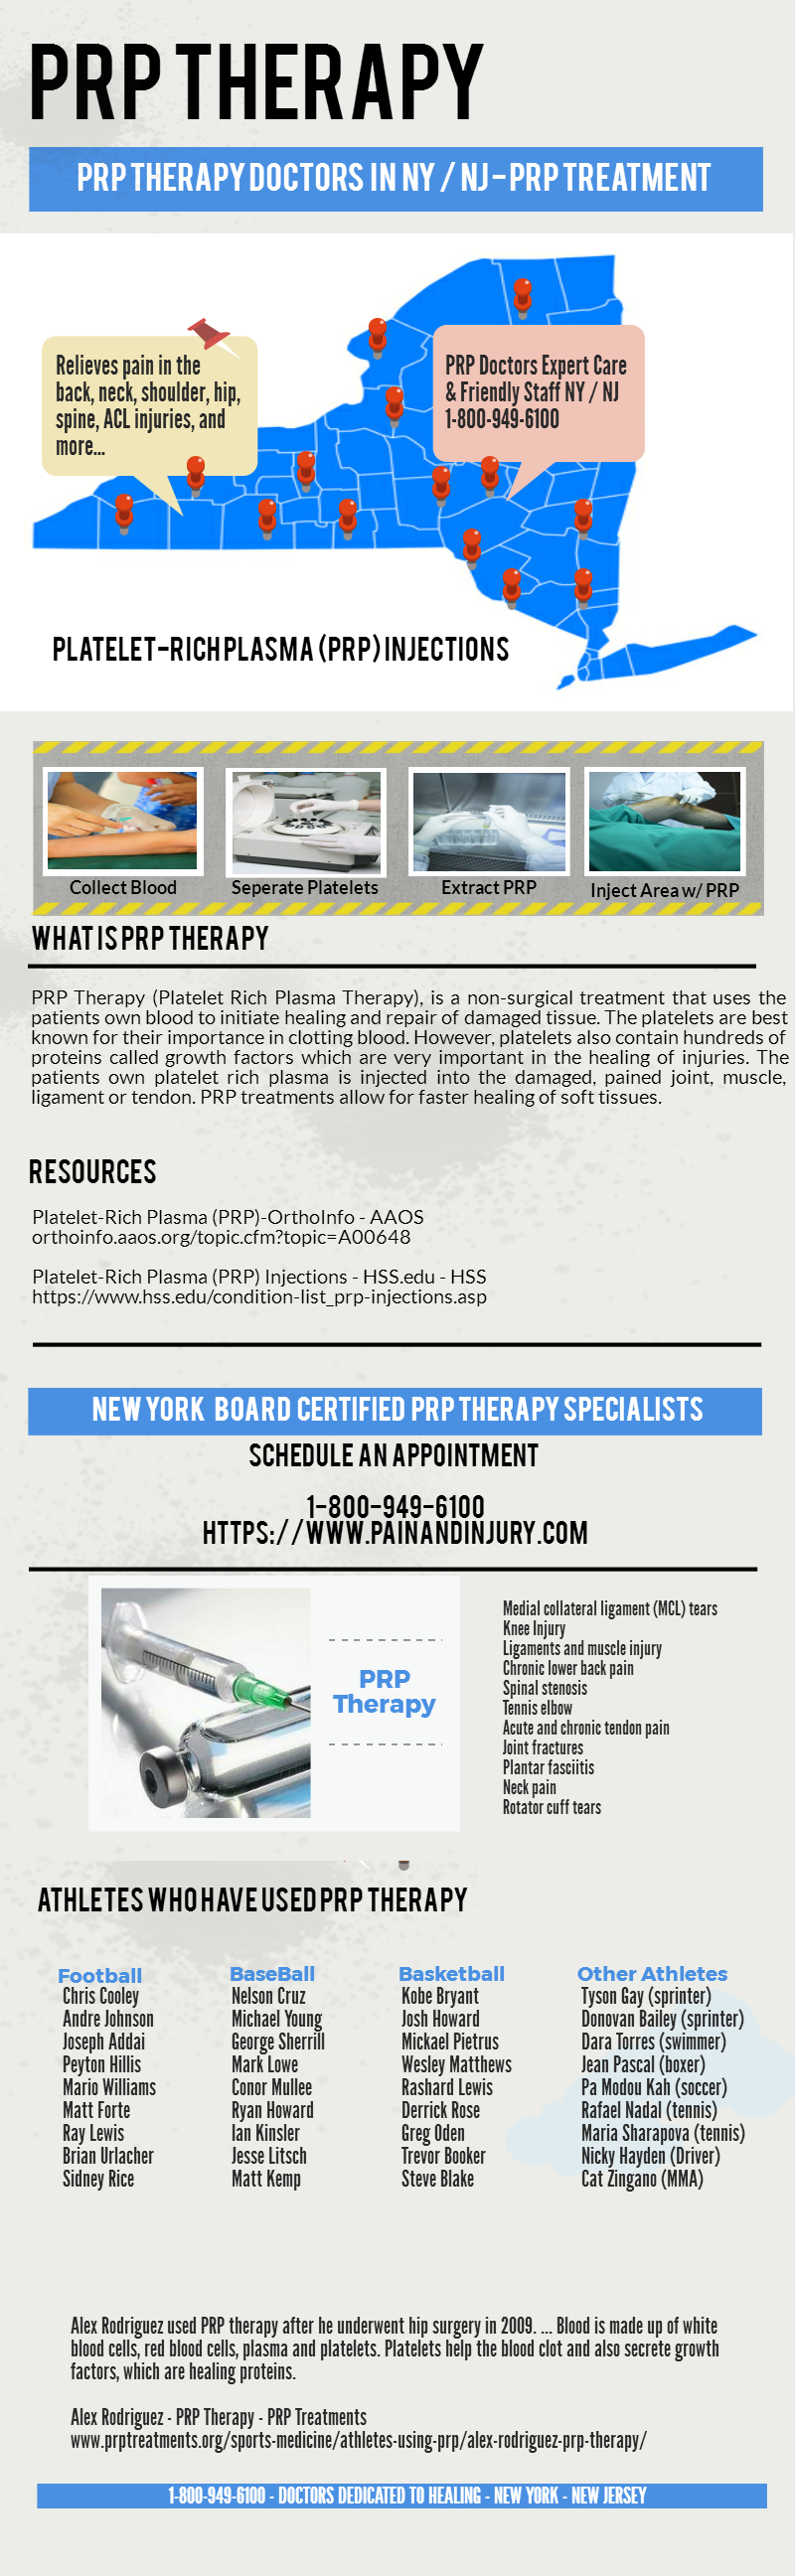 Platelet Rich Plasma (PRP) Injection Therapy & Treatments